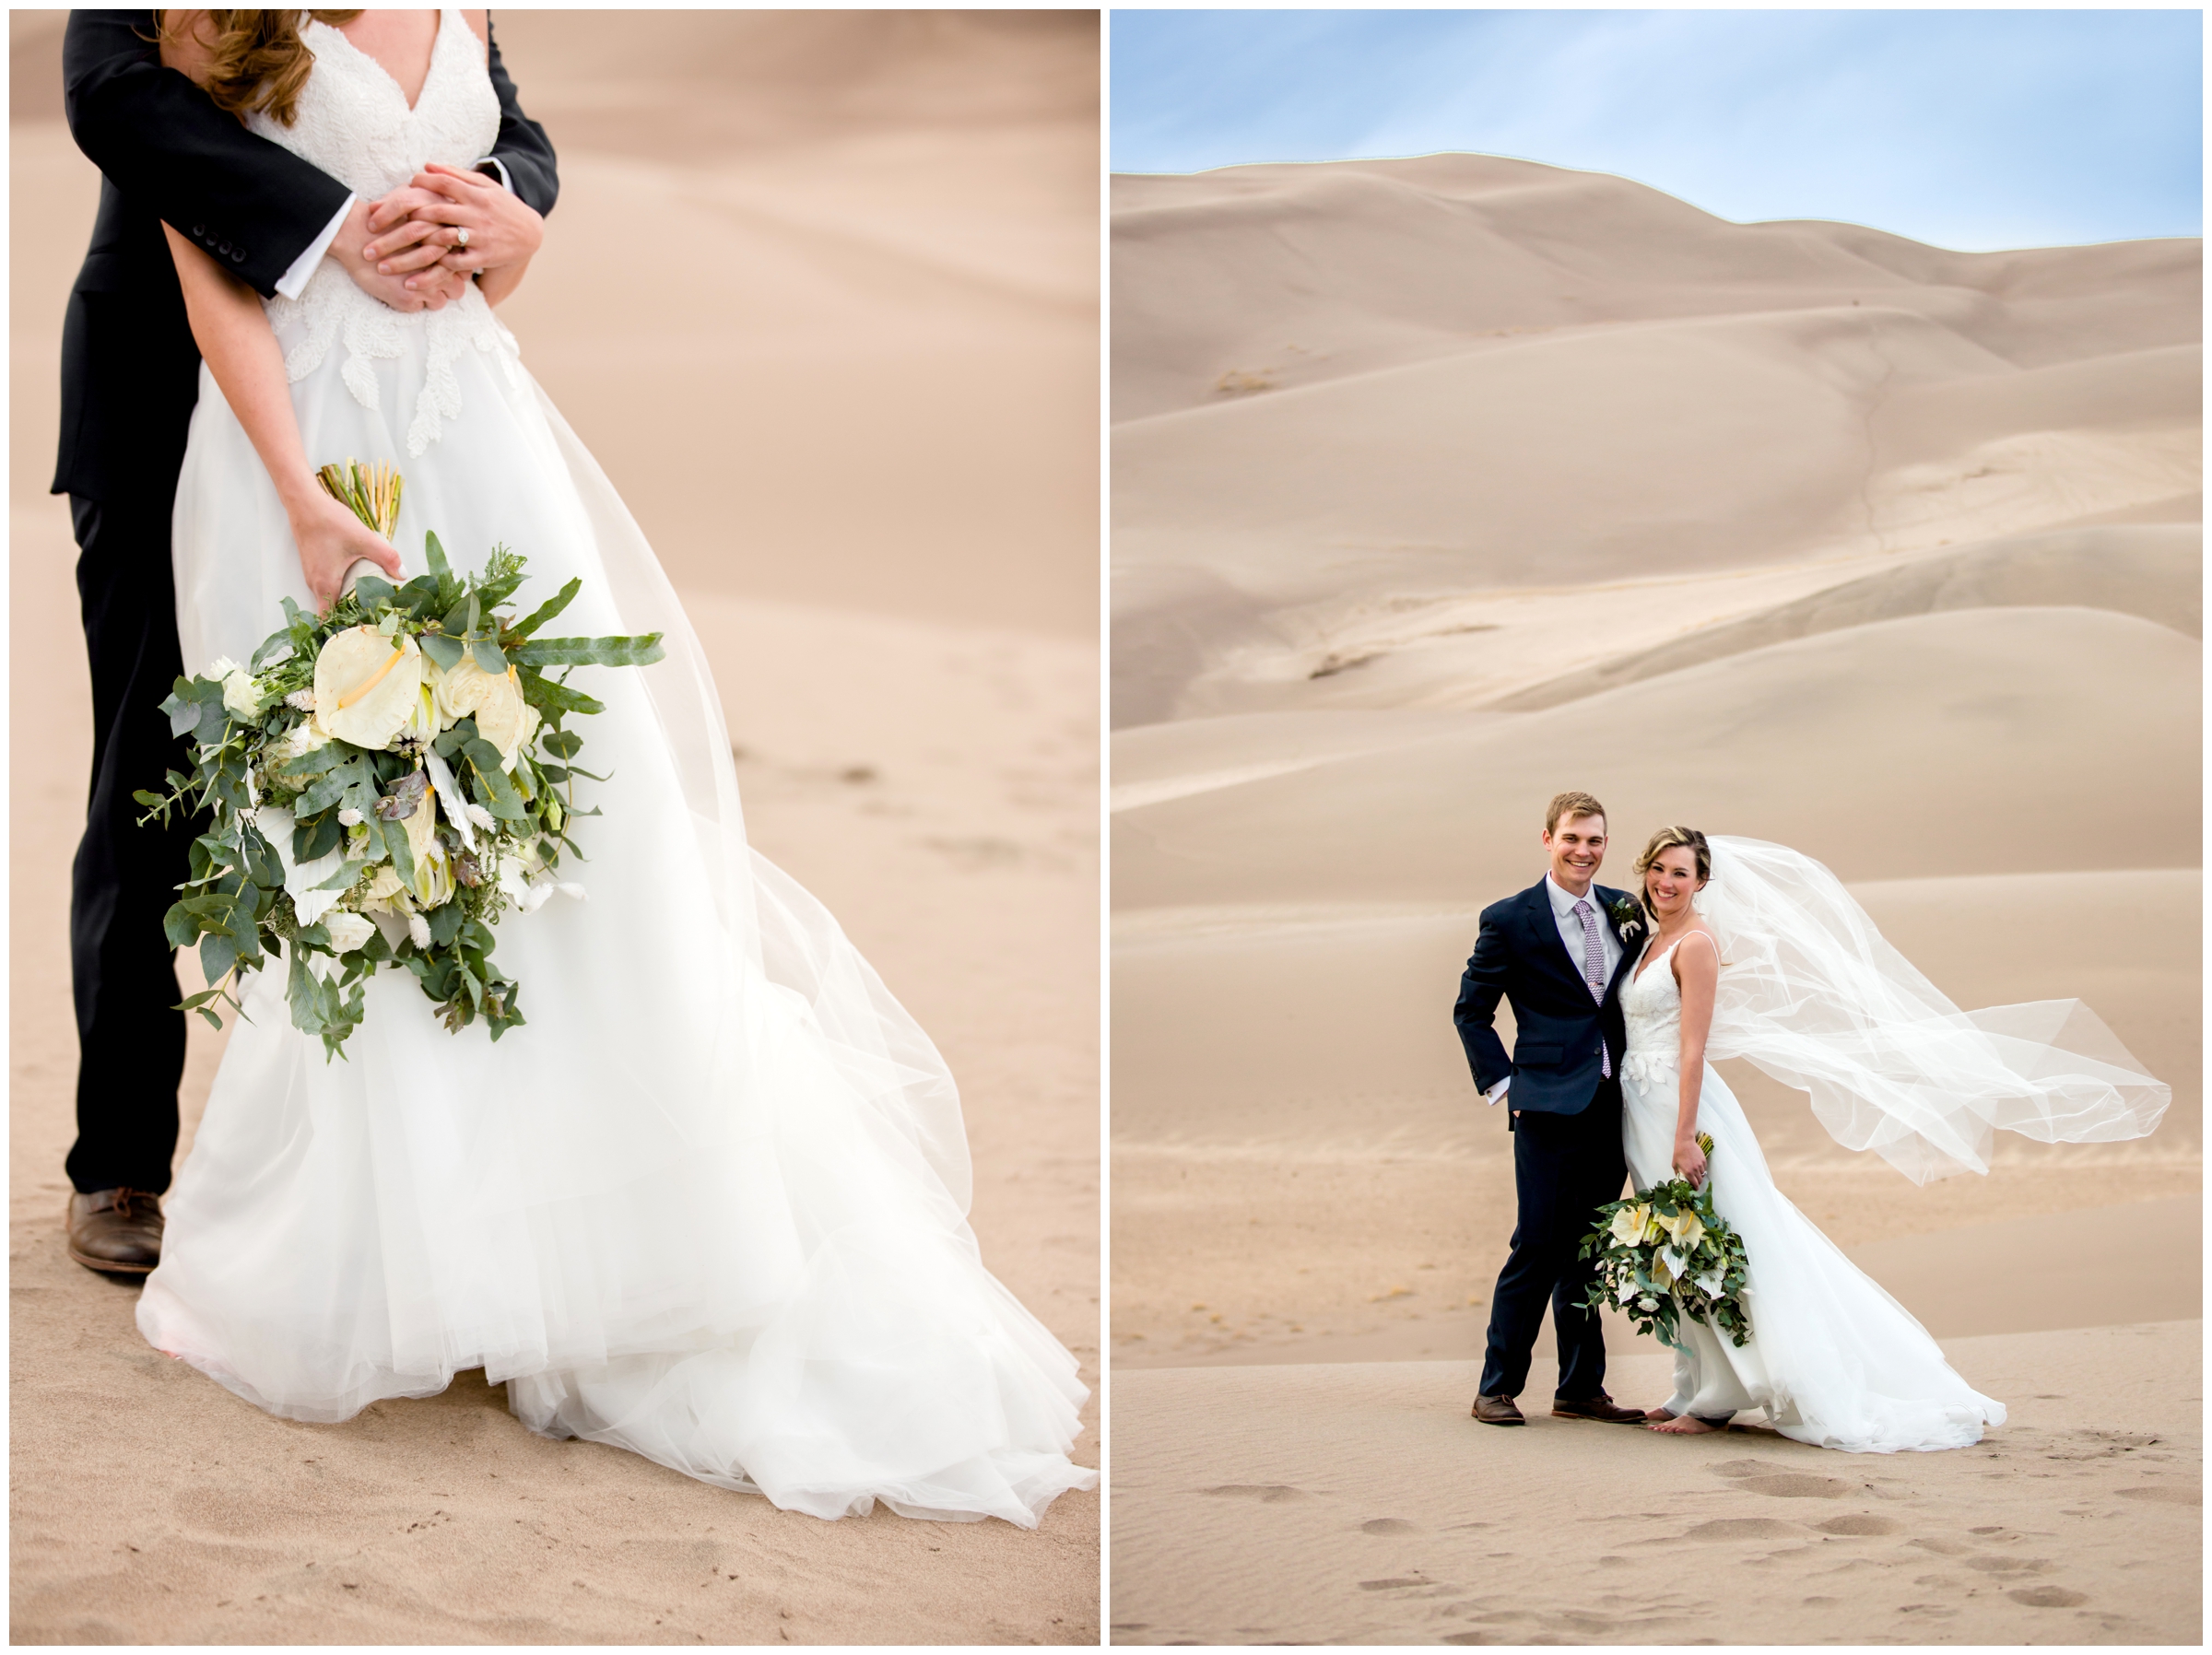 couple posing for intimate wedding photos with sand dunes in background by Colorado photographer Plum Pretty Photo 